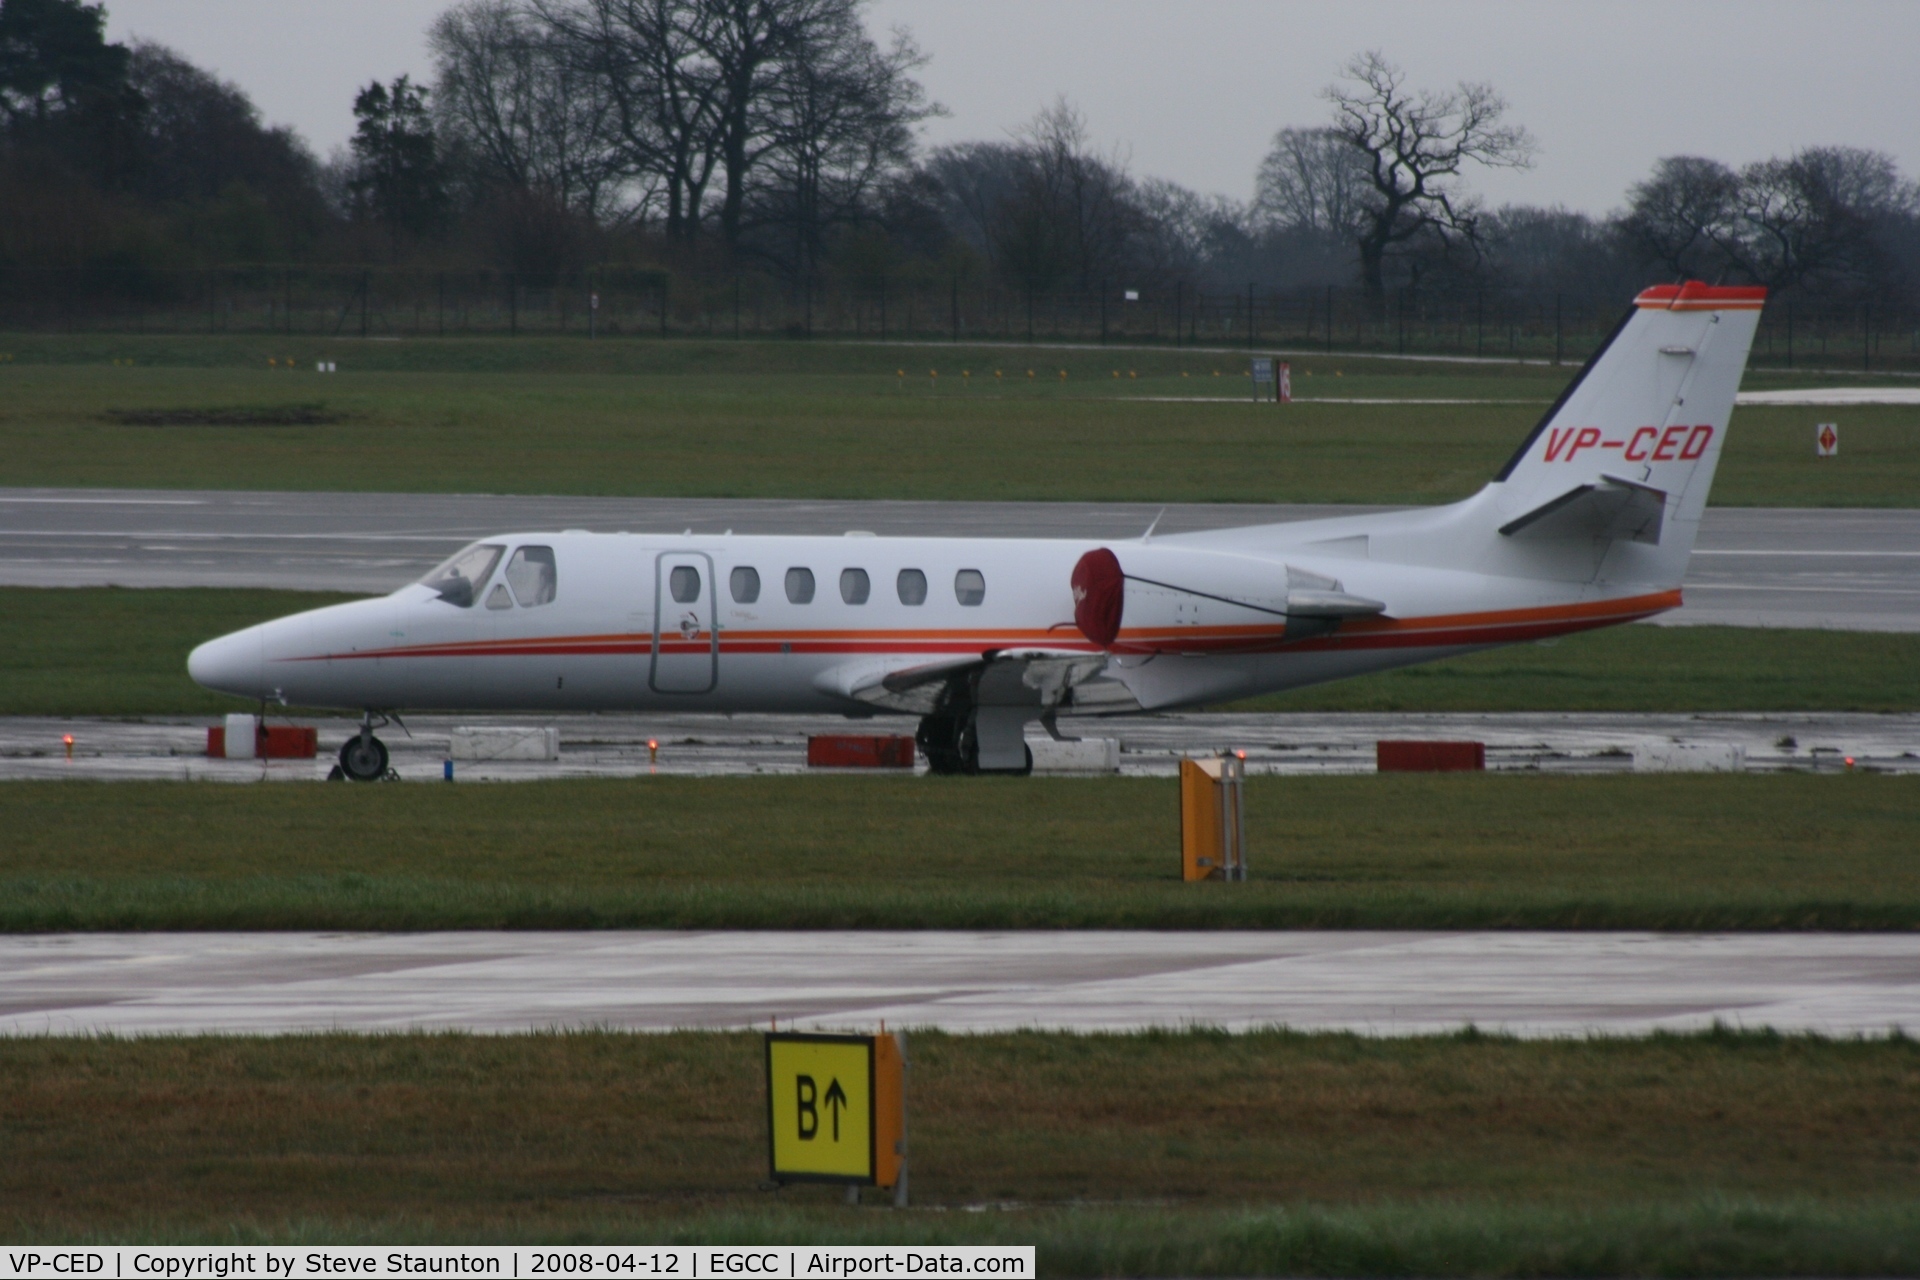 VP-CED, 1999 Cessna 550 Citation Bravo C/N 550-0870, Taken at Manchester Airport on a typical showery April day